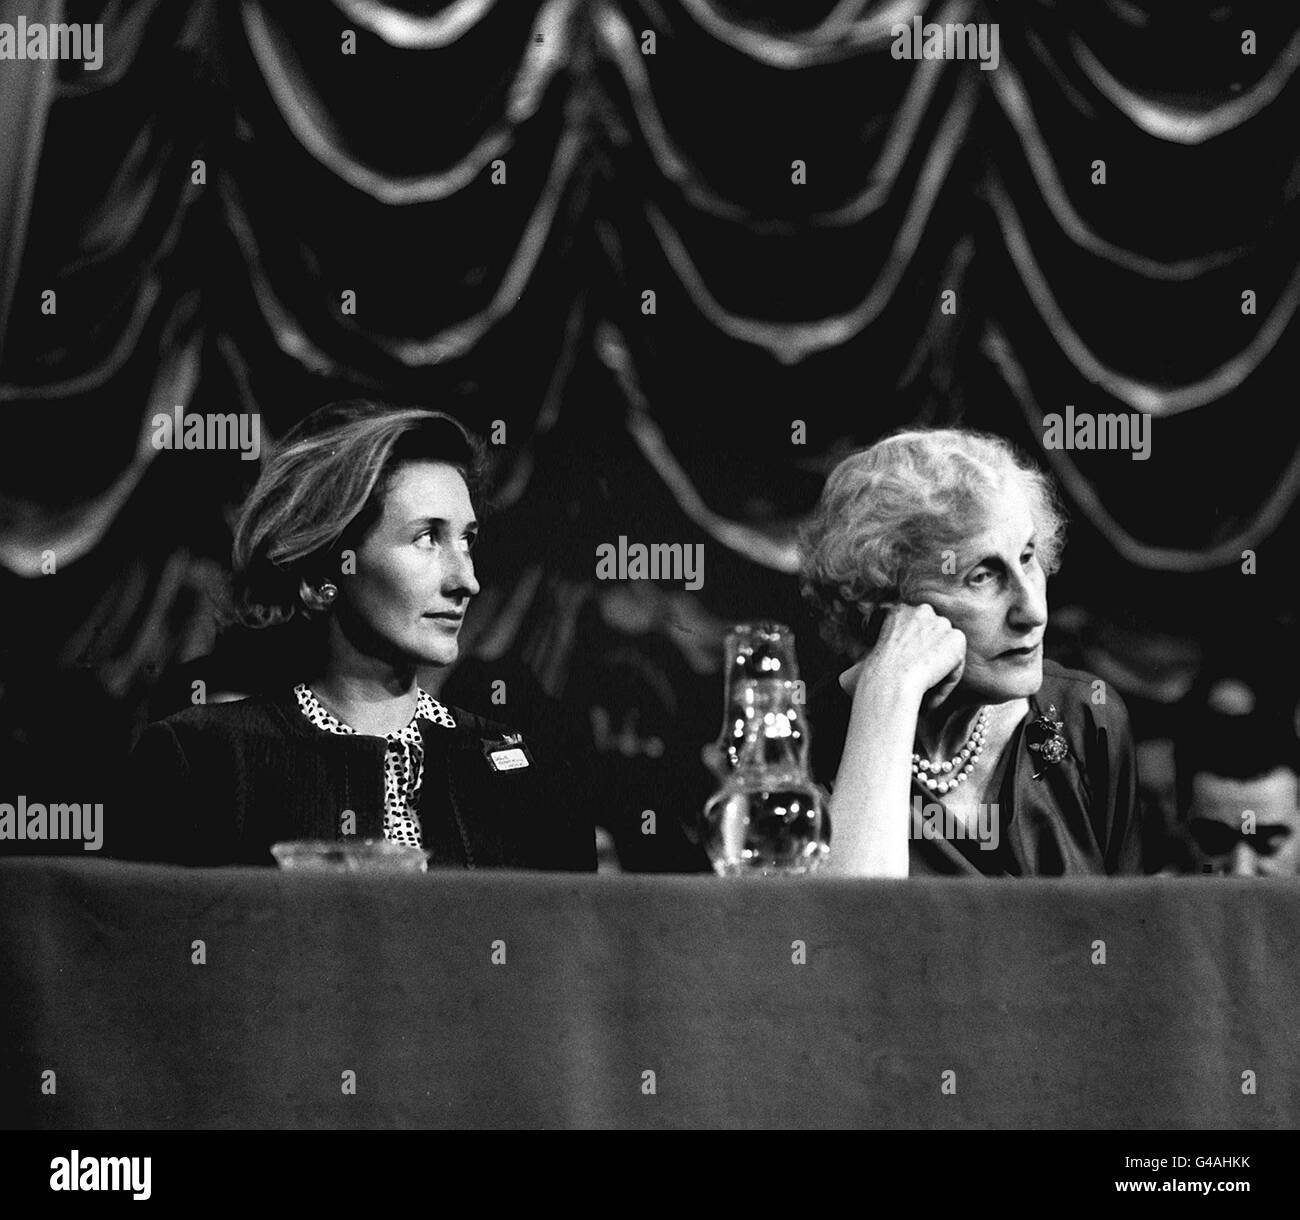 PA NEWS PHOTO 13/9/63  MARK BONHAM CARTER'S WIFE LESLIE AND LADY VIOLET BONHAM CARTER AT THE LIBERAL PARTY ASSSEMBLY IN BRIGHTON Stock Photo